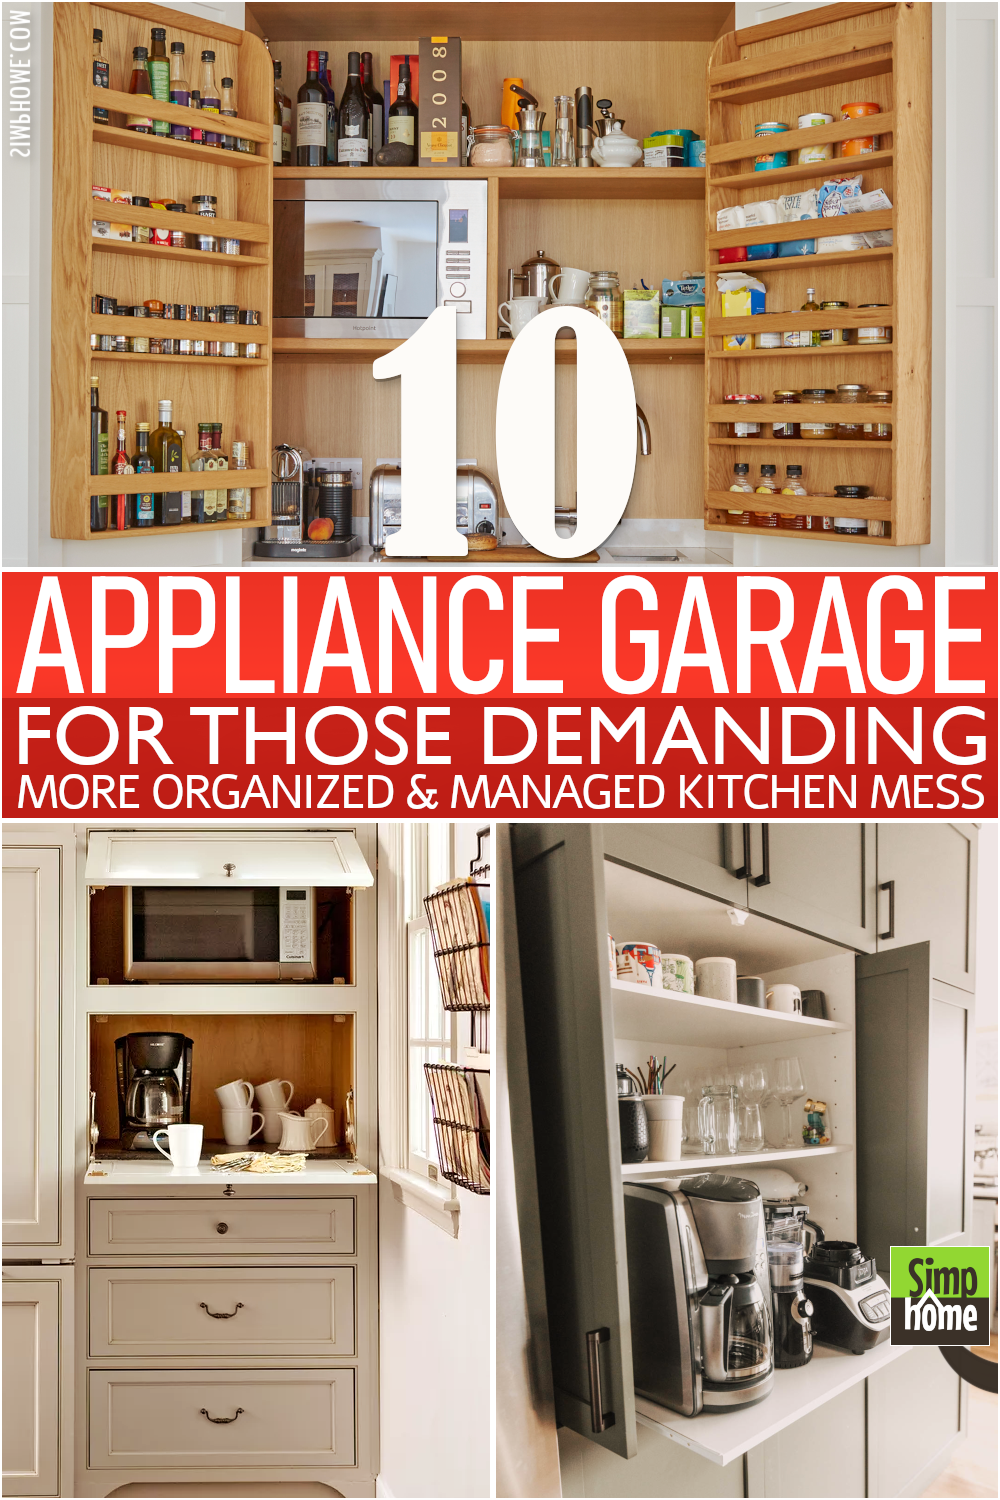 10 Appliance garage poster from Simphome